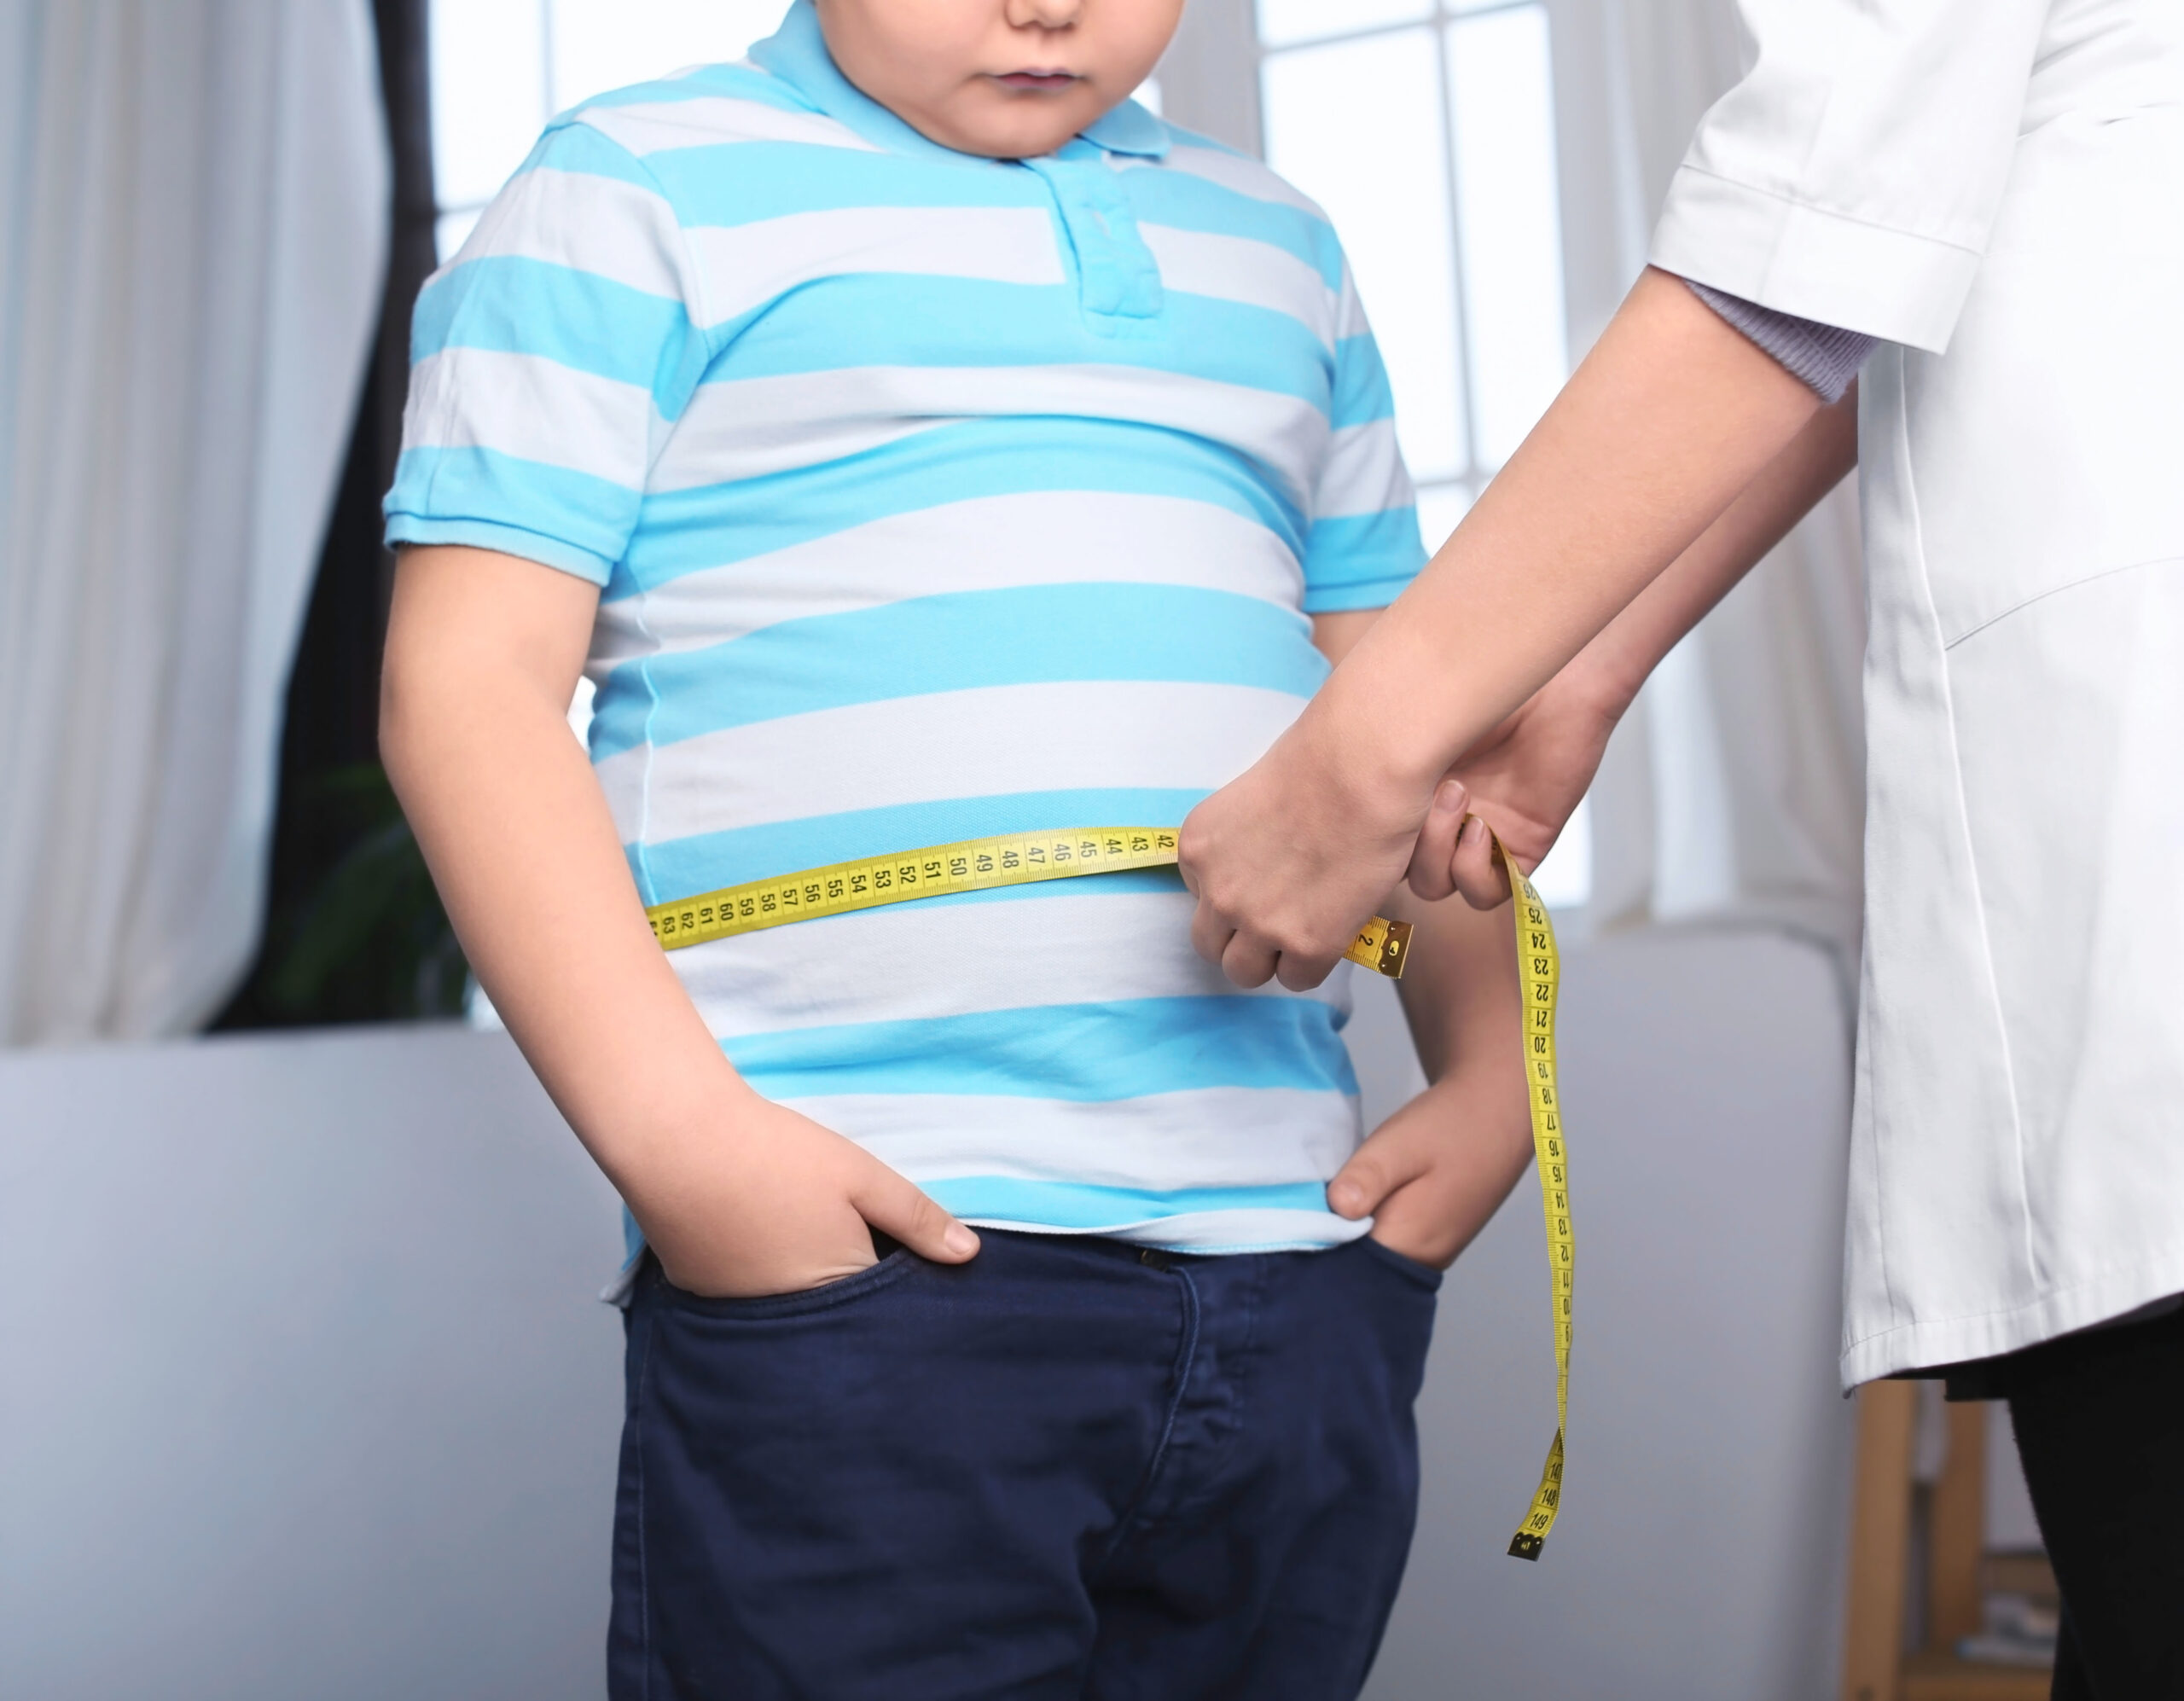 Probiotics May Help To Manage Childhood Obesity